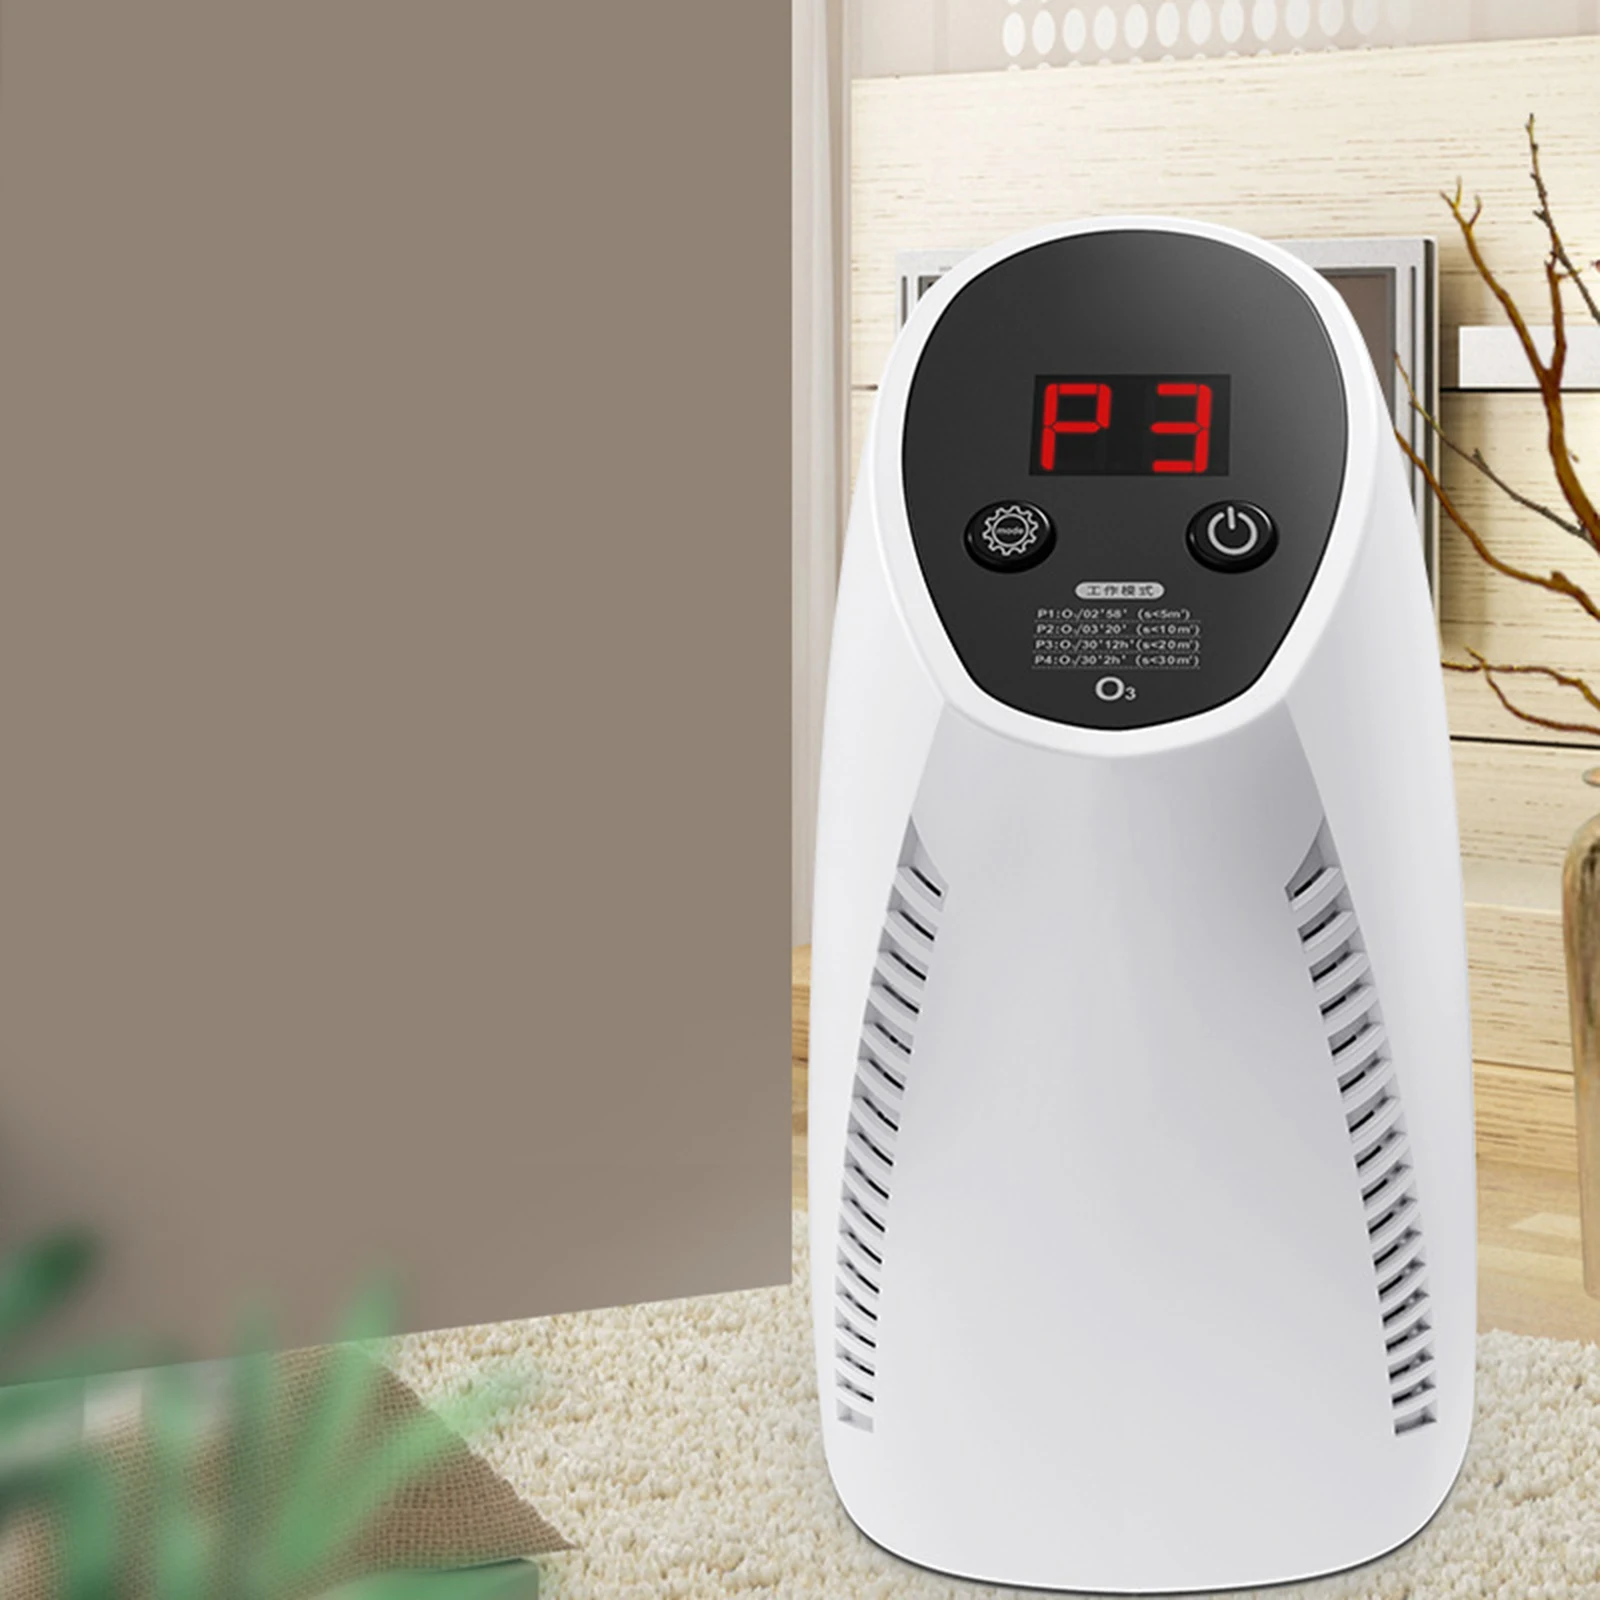 Air Purifier USB Charing Floor/ Wall Mounted Air Cleaner, Particle, Carbon Filter, Allergens, Odors, Smoke, Pets Smell Filters